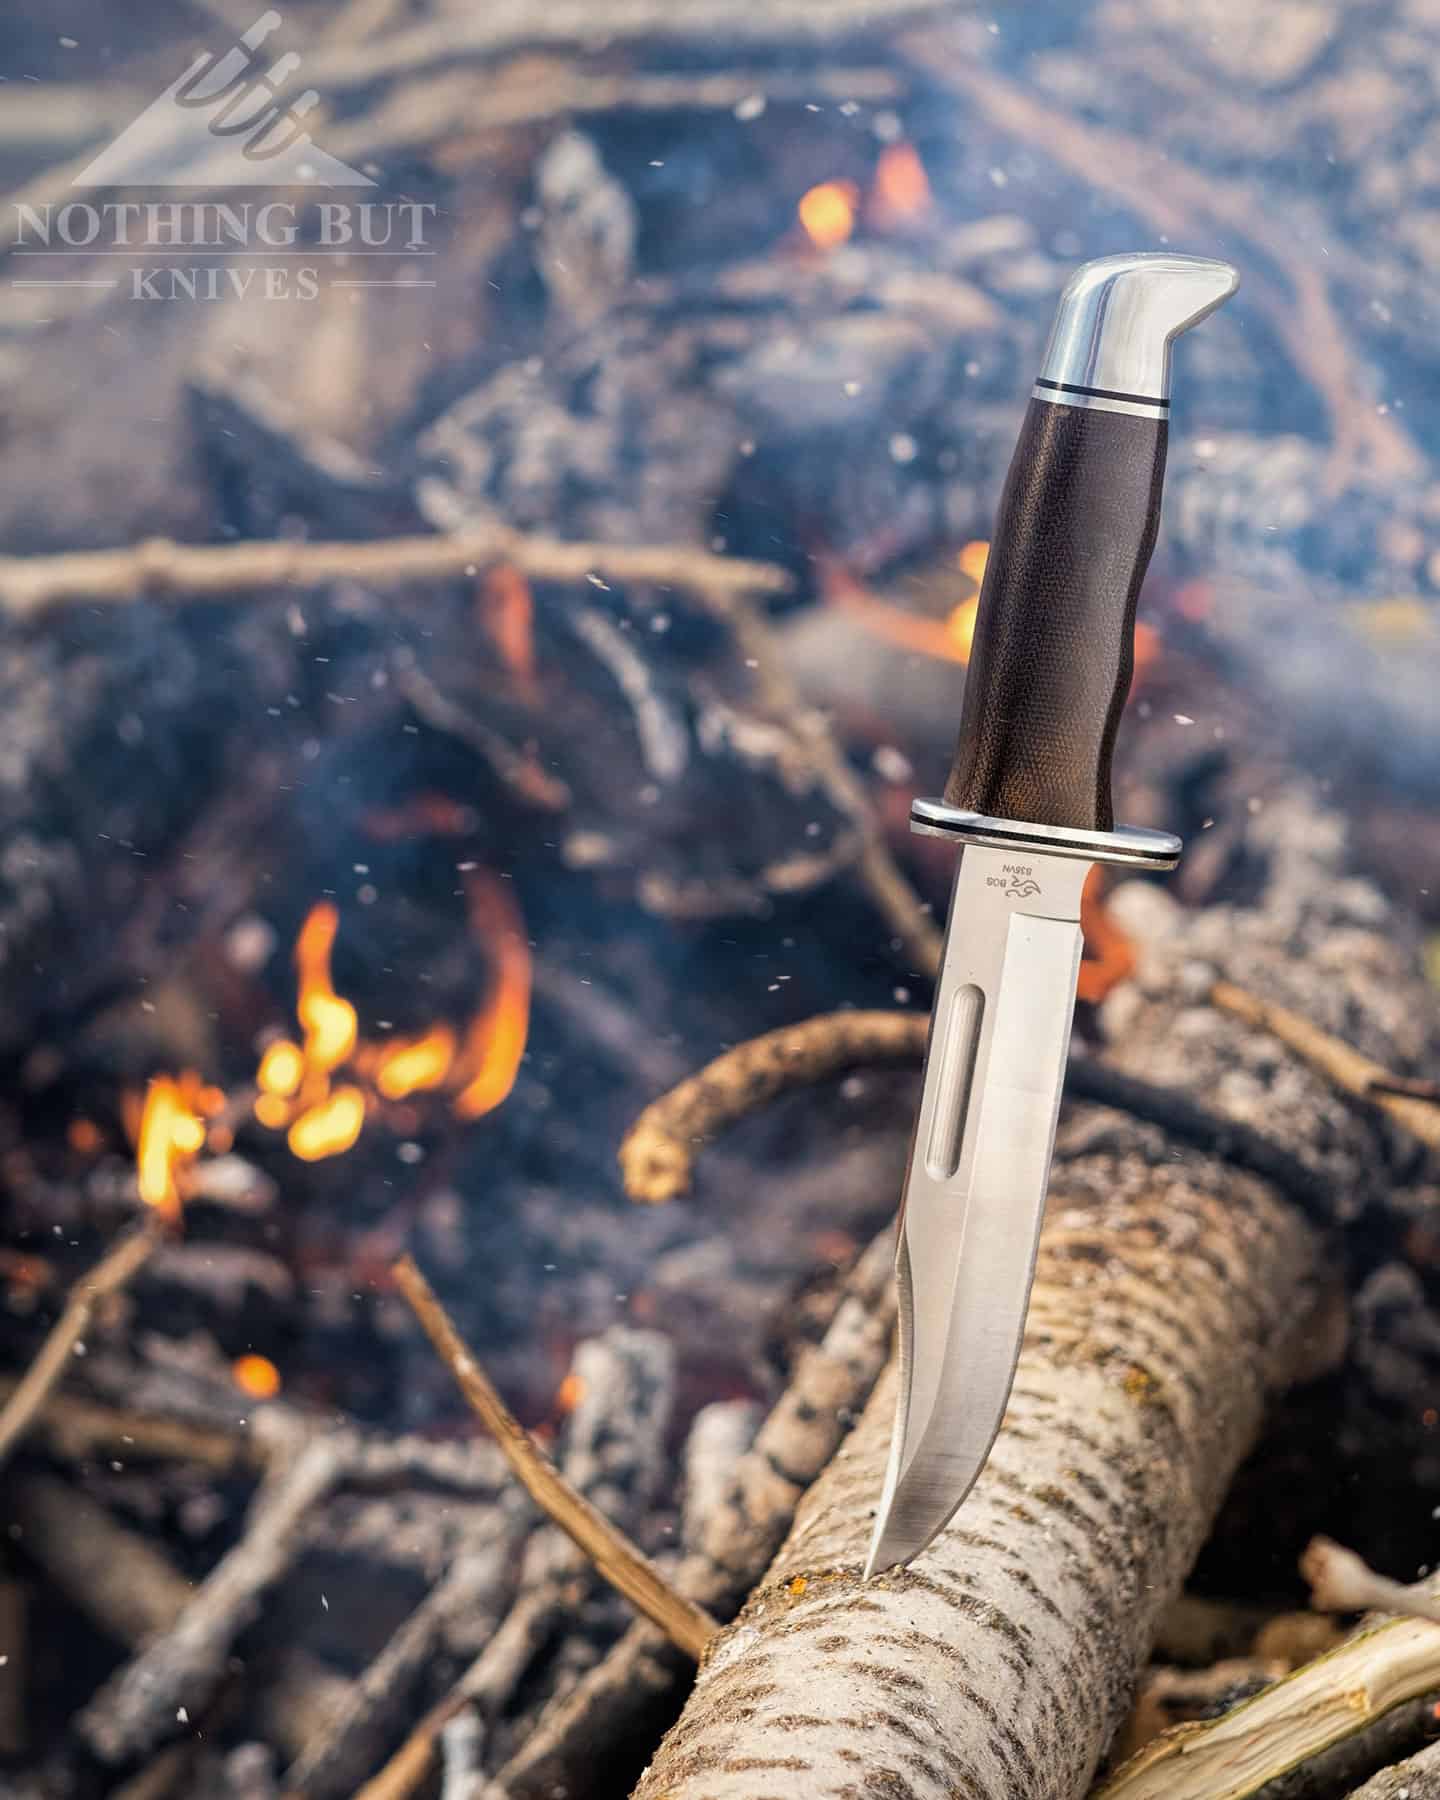 The Buck 119 is one of the most iconic American made knives.